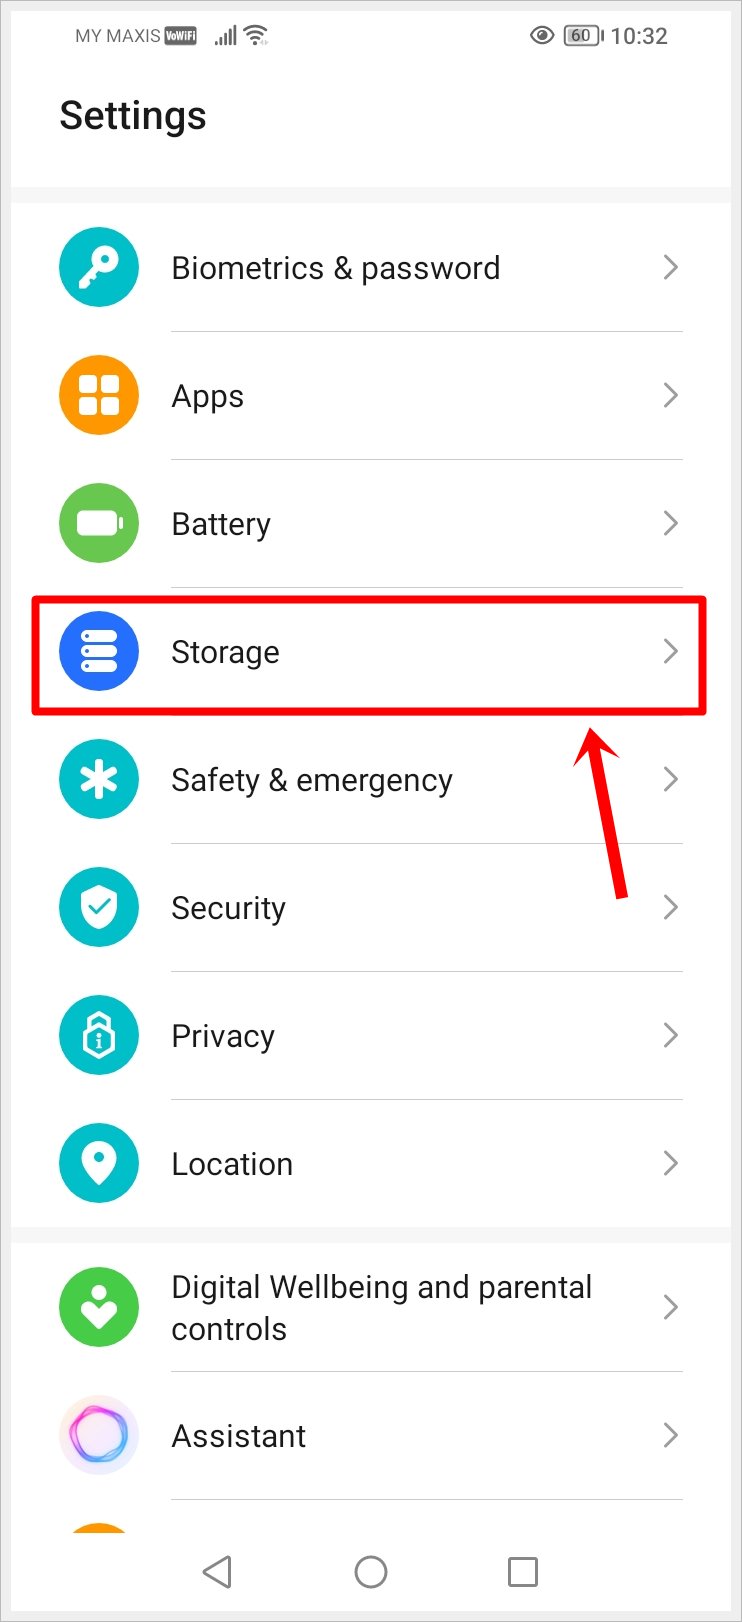 This image shows a screenshot of an Android phone's Setting menu, with the 'Storage' option highlighted.